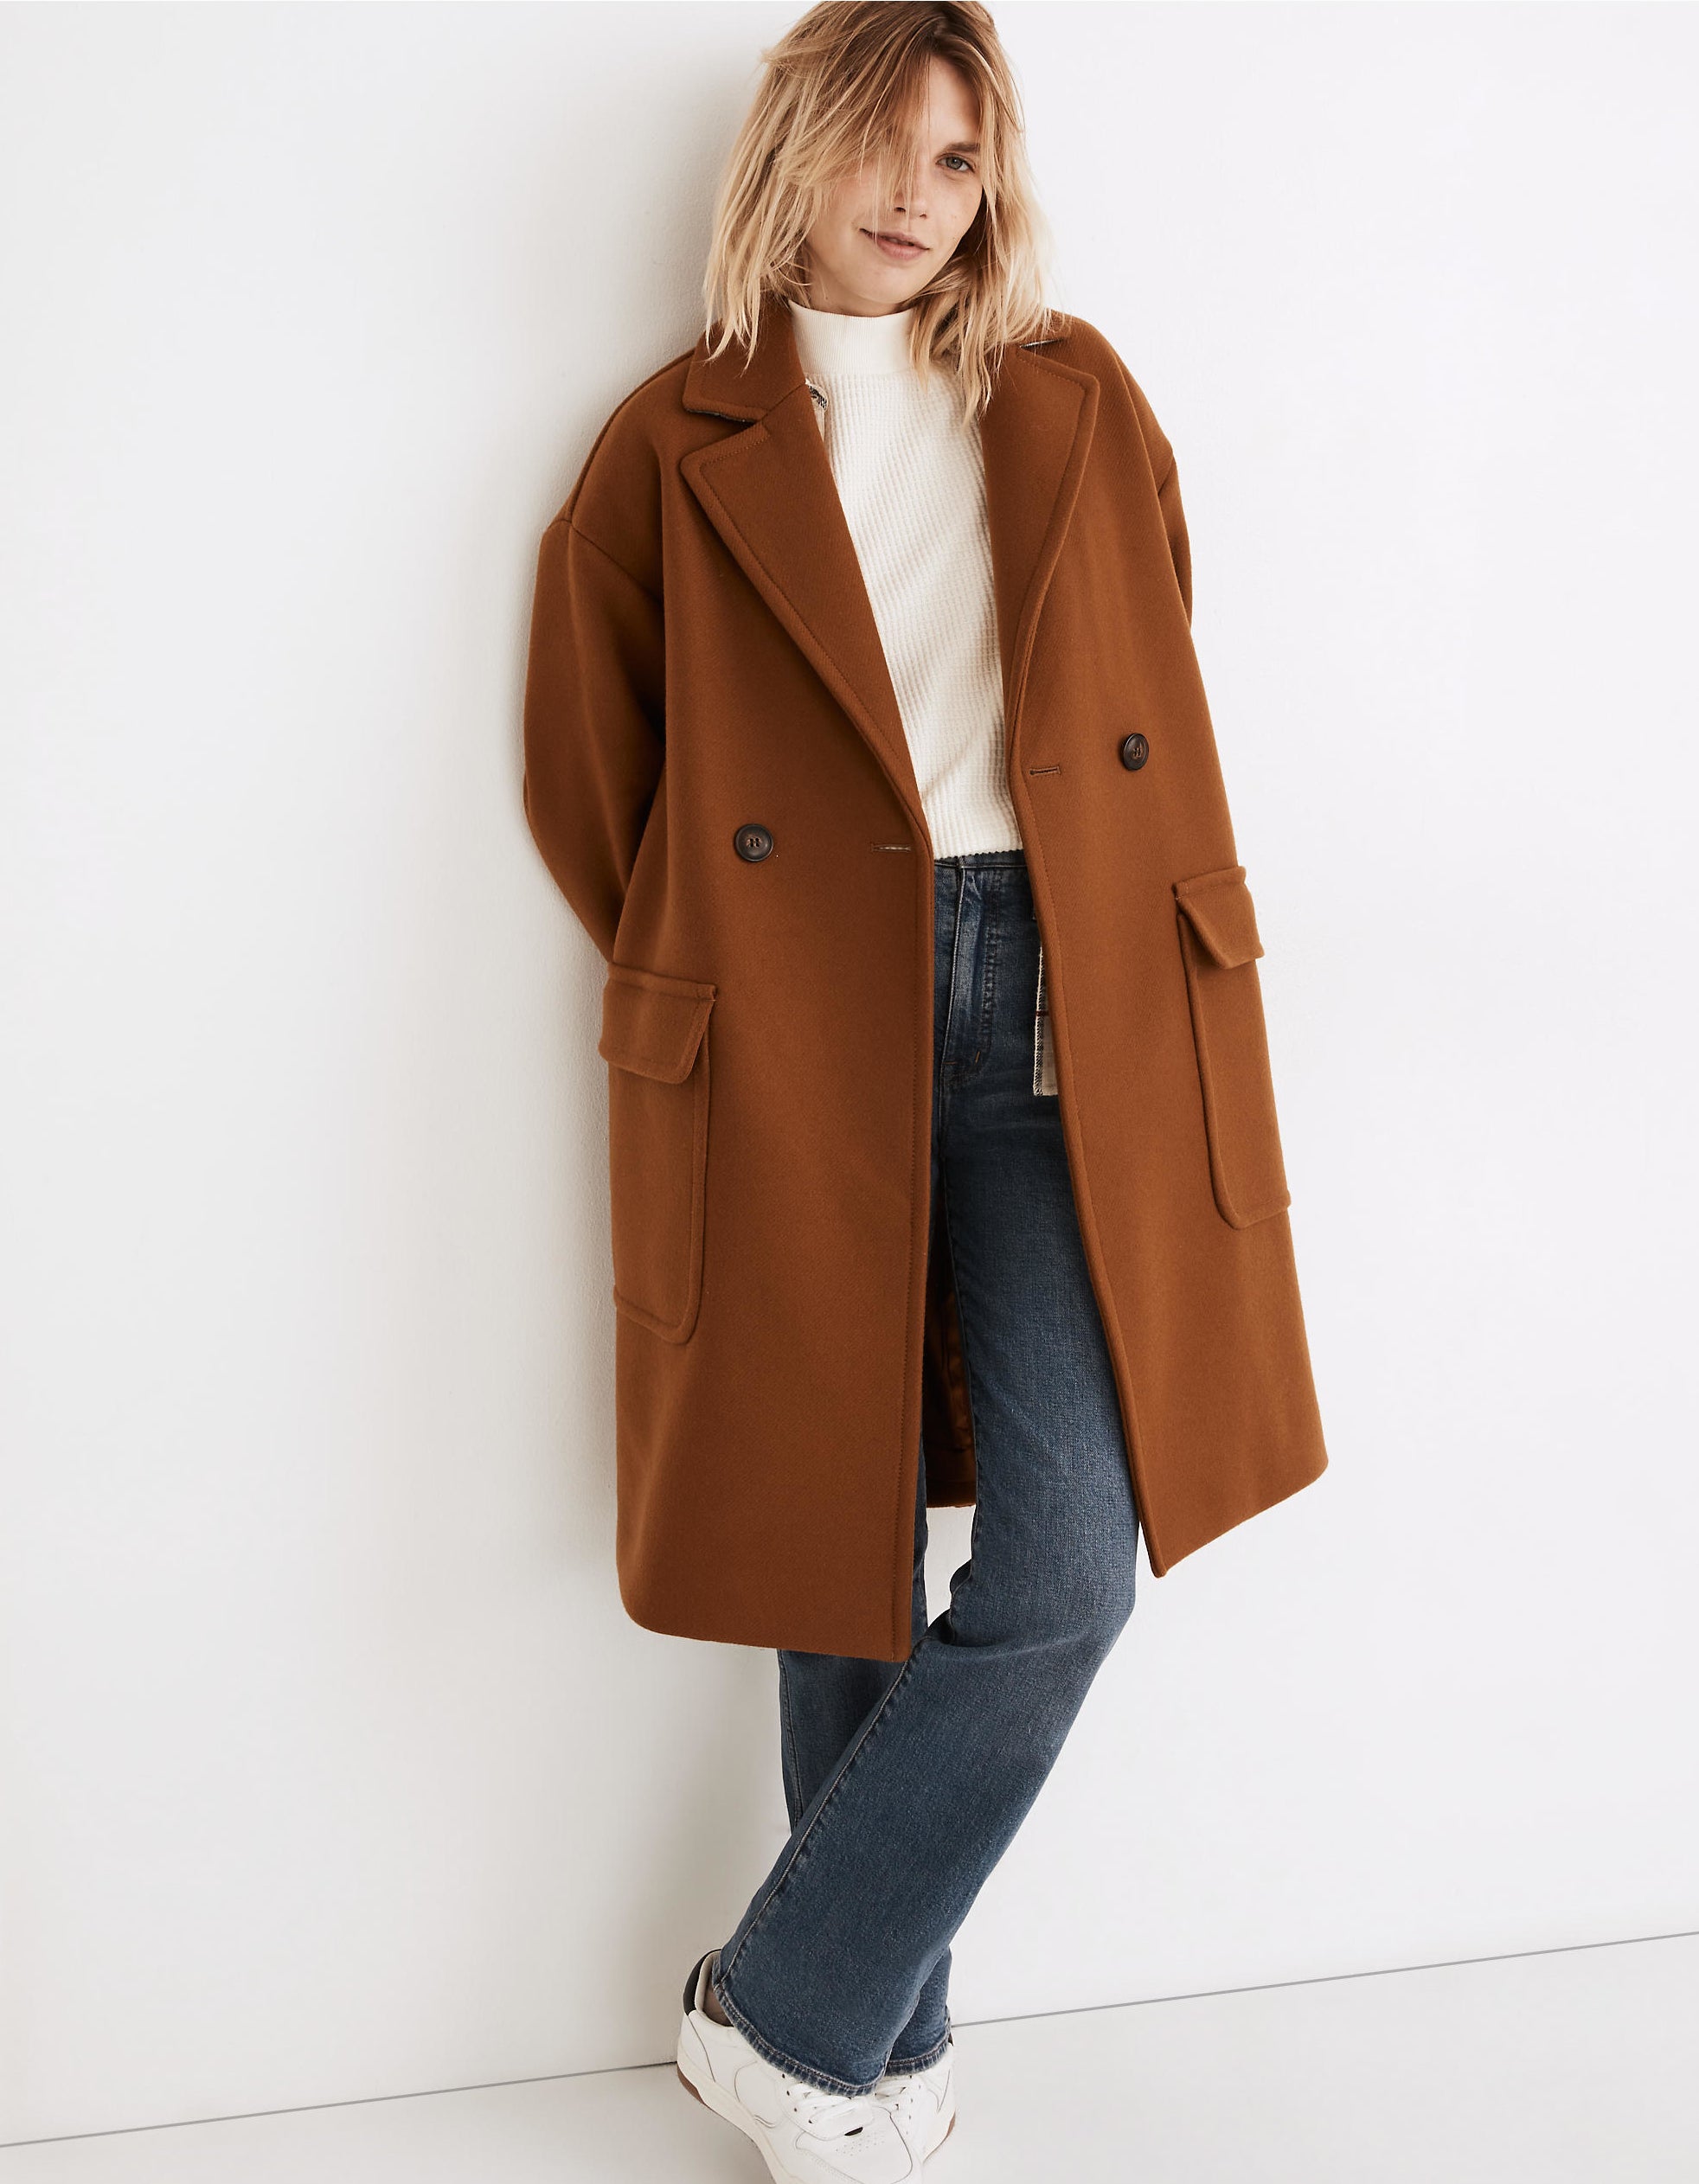 a model in a warm brown peacoat